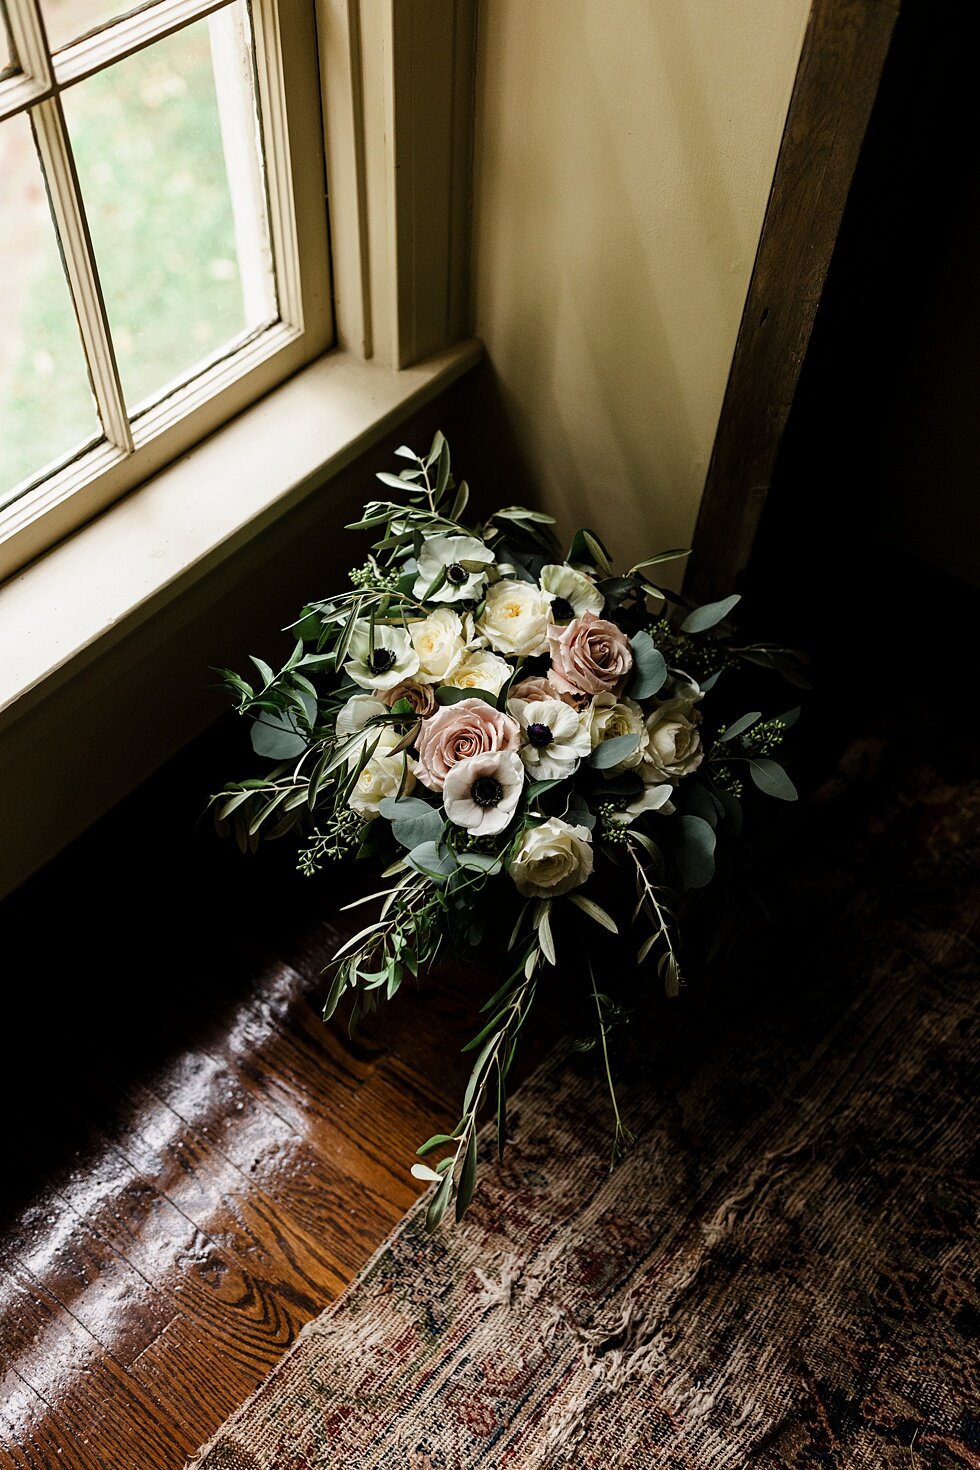  Beautiful white and light pink bridal bouquet with dark green floral accents are elegant and sophisticated for this intimate backyard wedding. Kentucky wedding photographer wedding bliss just married love ceremony inspiration garden wedding intimate